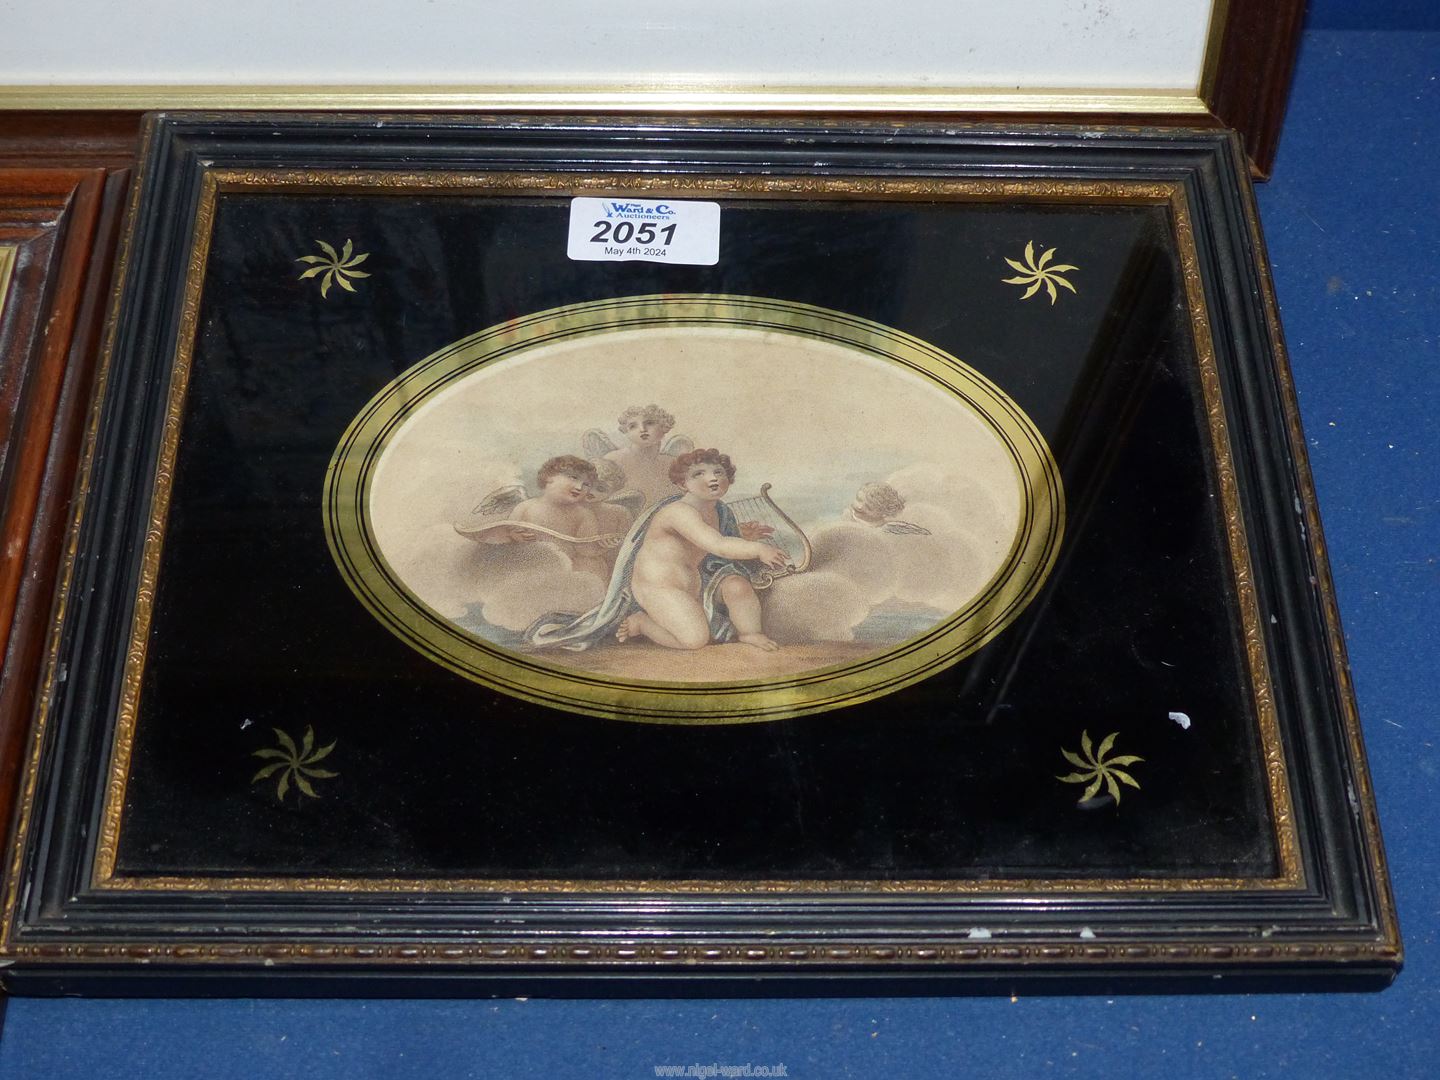 An oval Engraving of Cherubs in glomyized glass, a woman and child feeding chickens framed, - Image 2 of 3